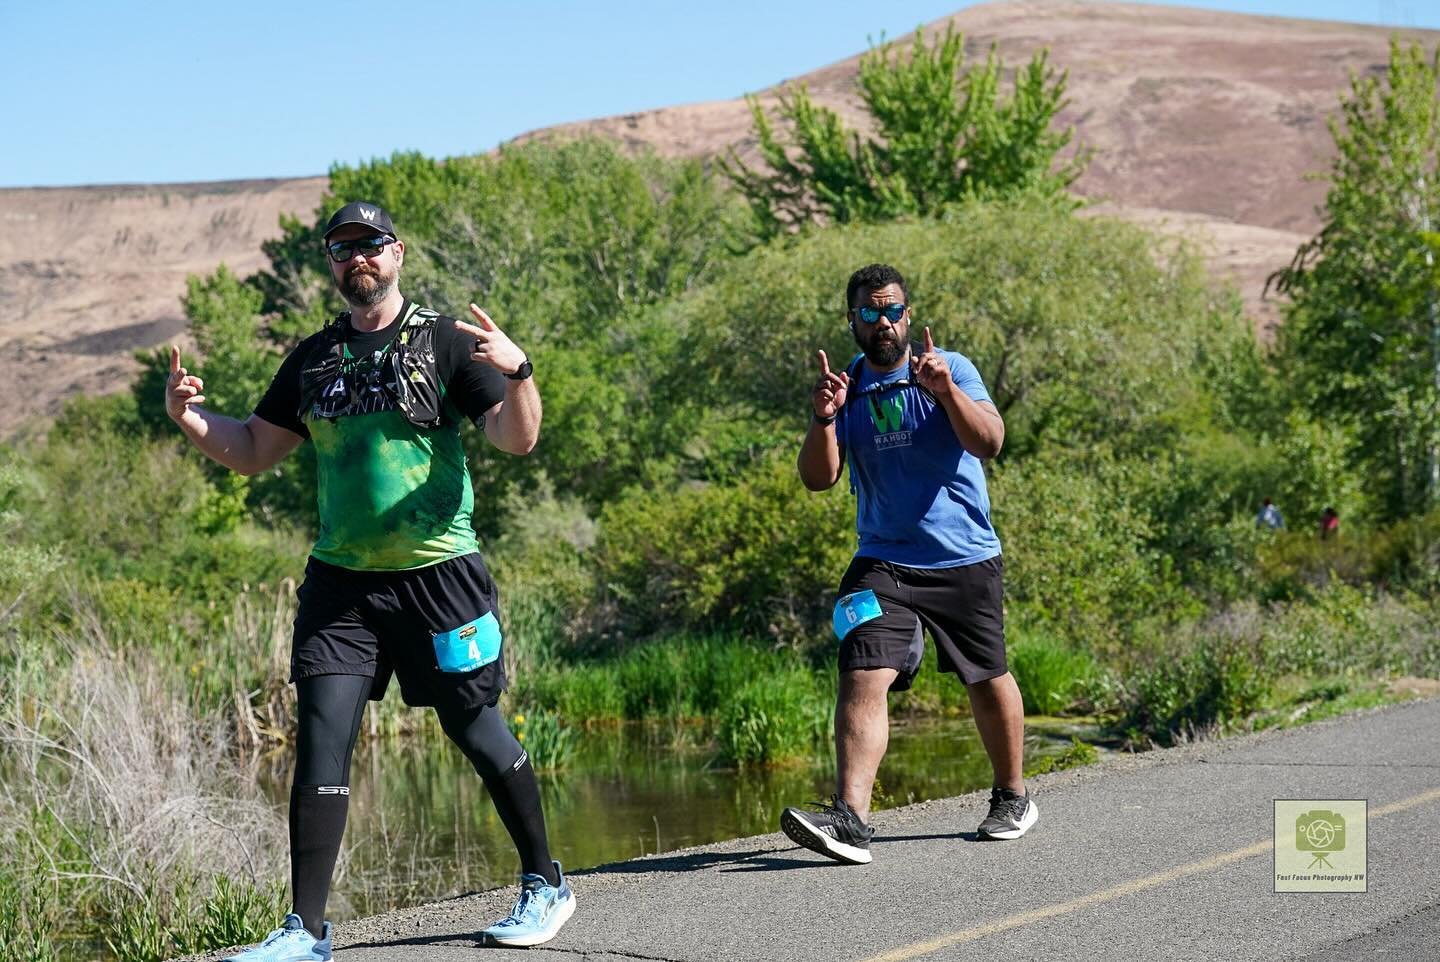 Our Jewel of the valley Marathon in Yakima is a gem in Central Washington with sunshine and a flat paved trail.

Thank you, Runners for joining us today!